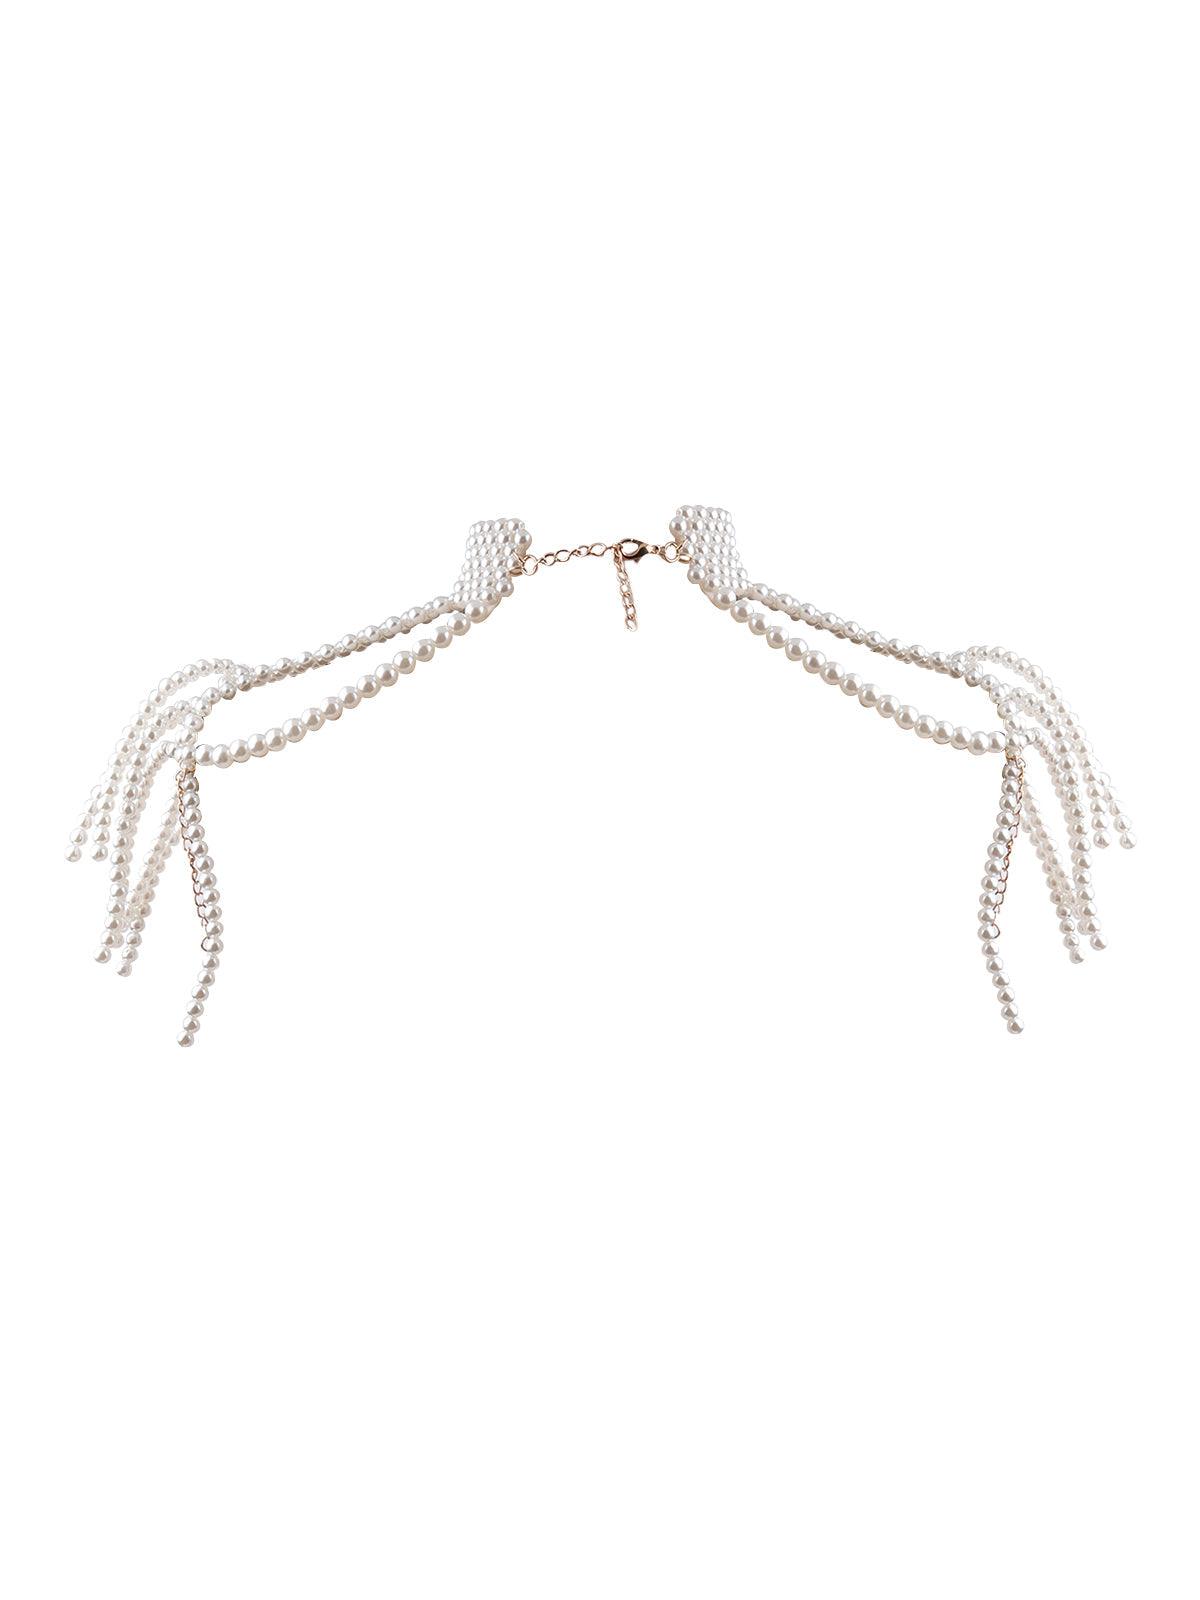 Women's White Artificial Pearl Beaded Statement Necklace - Odette